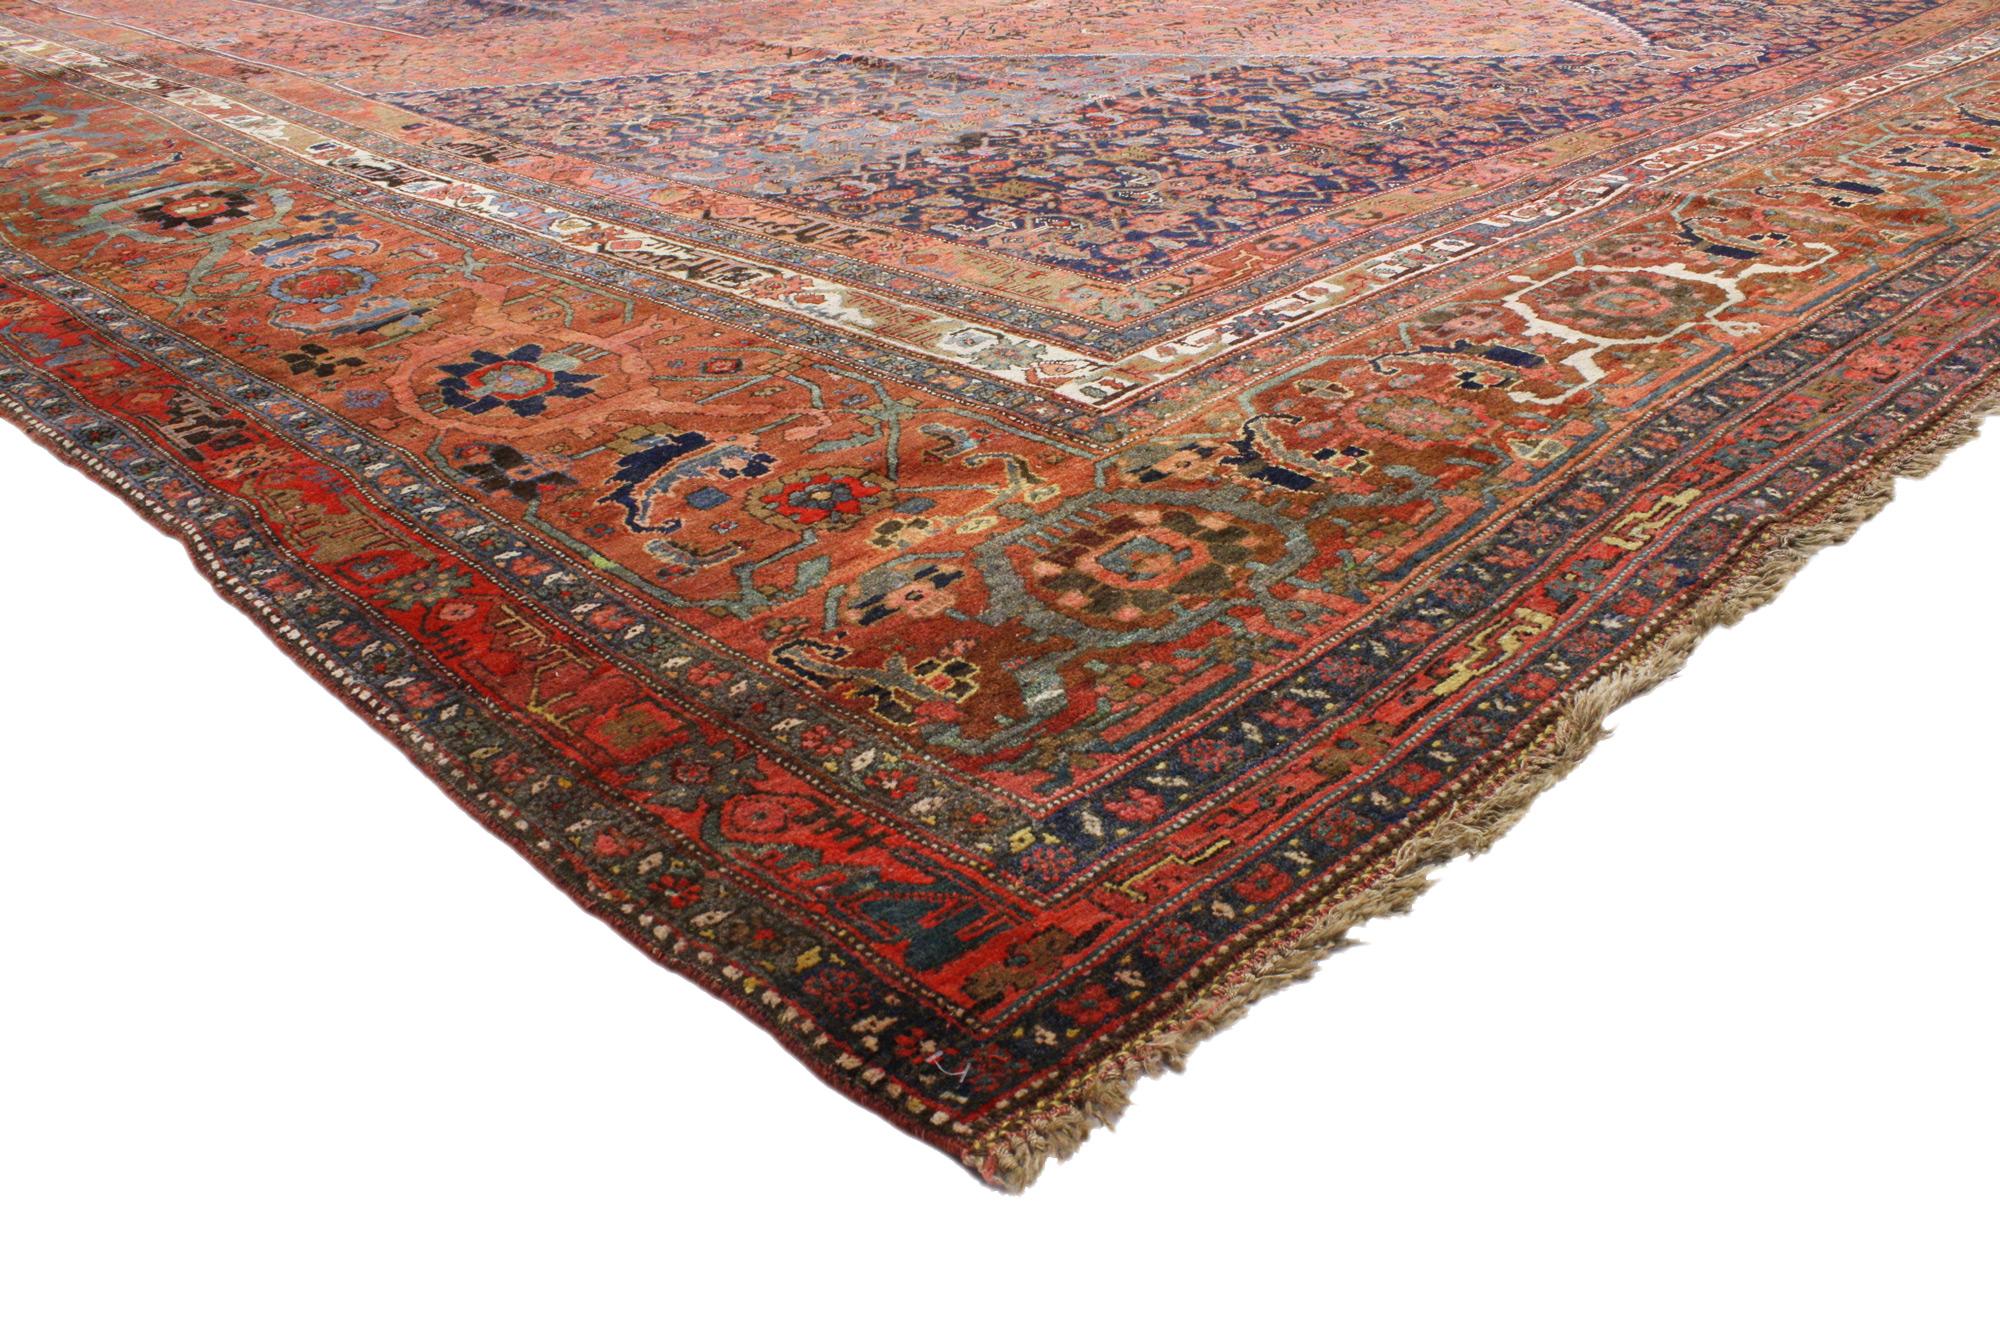 73125 Oversized Antique Persian Bijar Rug, 15'01 x 26'01. 
Cleverly composed and distinctively well-balanced, this hand knotted wool oversized antique Persian Bijar rug will take on a curated lived-in look that feels timeless while imparting a sense